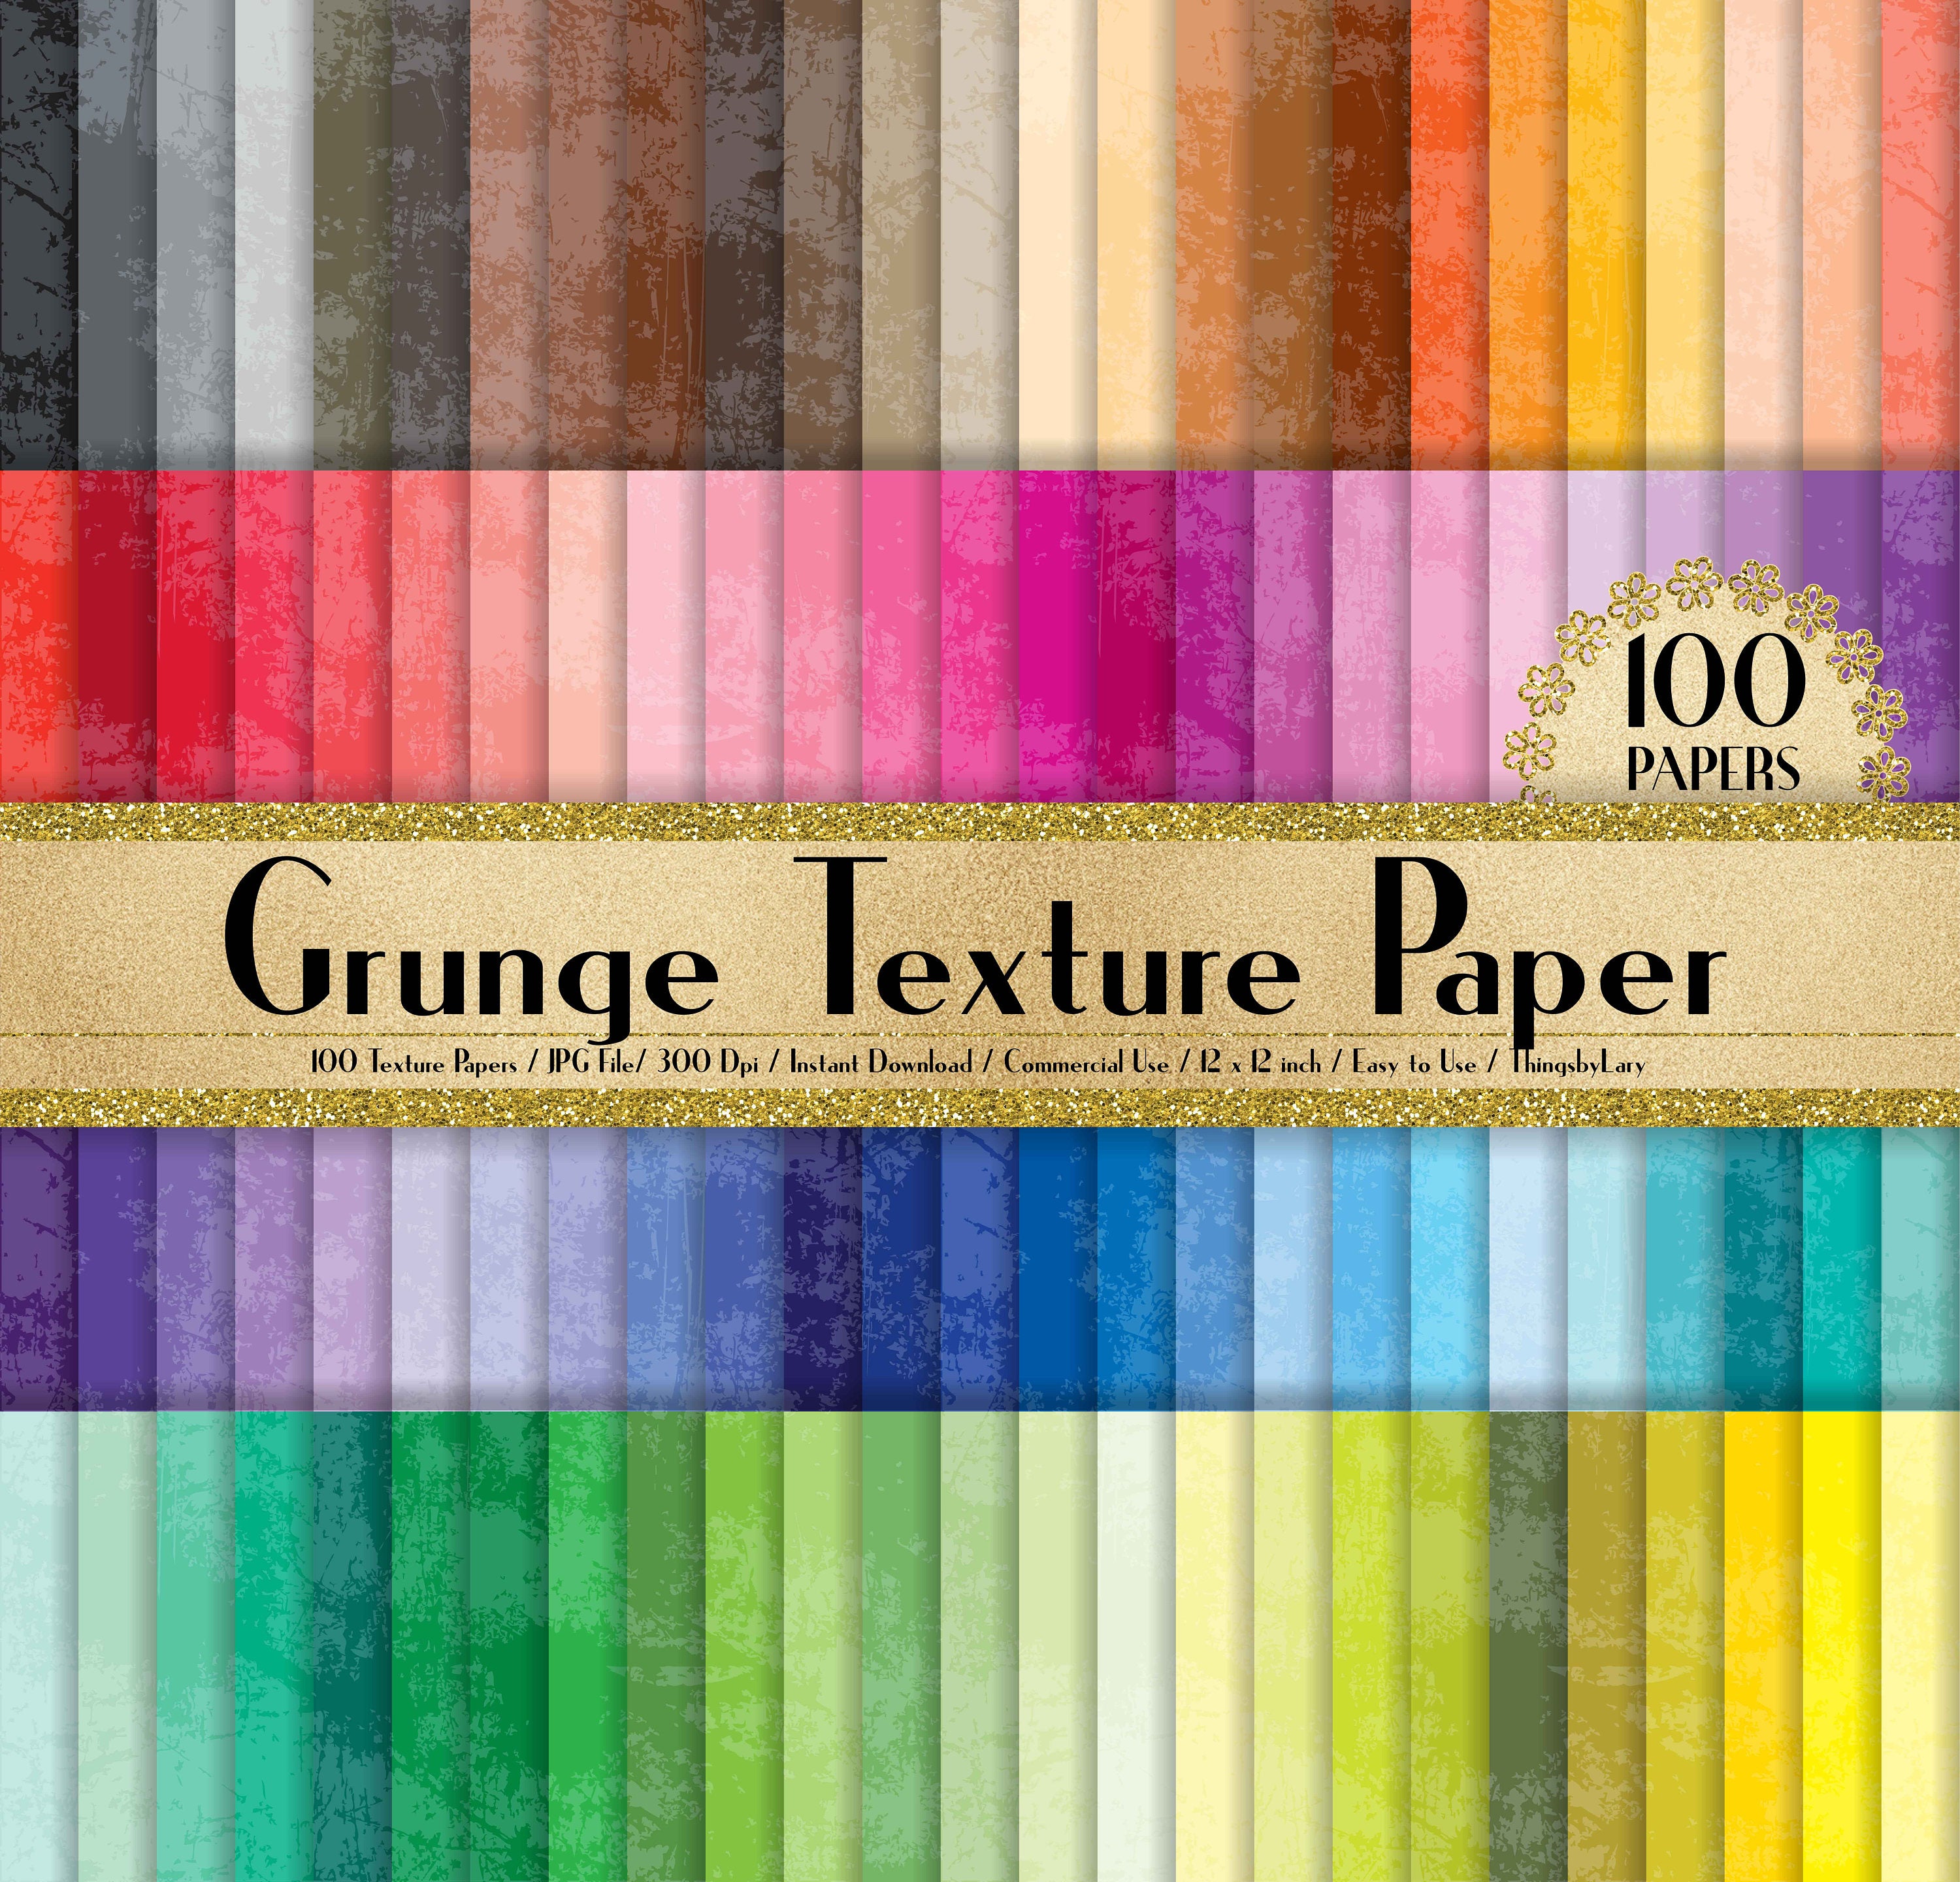 100 Grunge Texture Papers in 12&quot; x 12&quot;, 300 Dpi Planner Paper, Scrapbook Paper,Rainbow Paper,100 Flower Papers,100 Grunge Paper